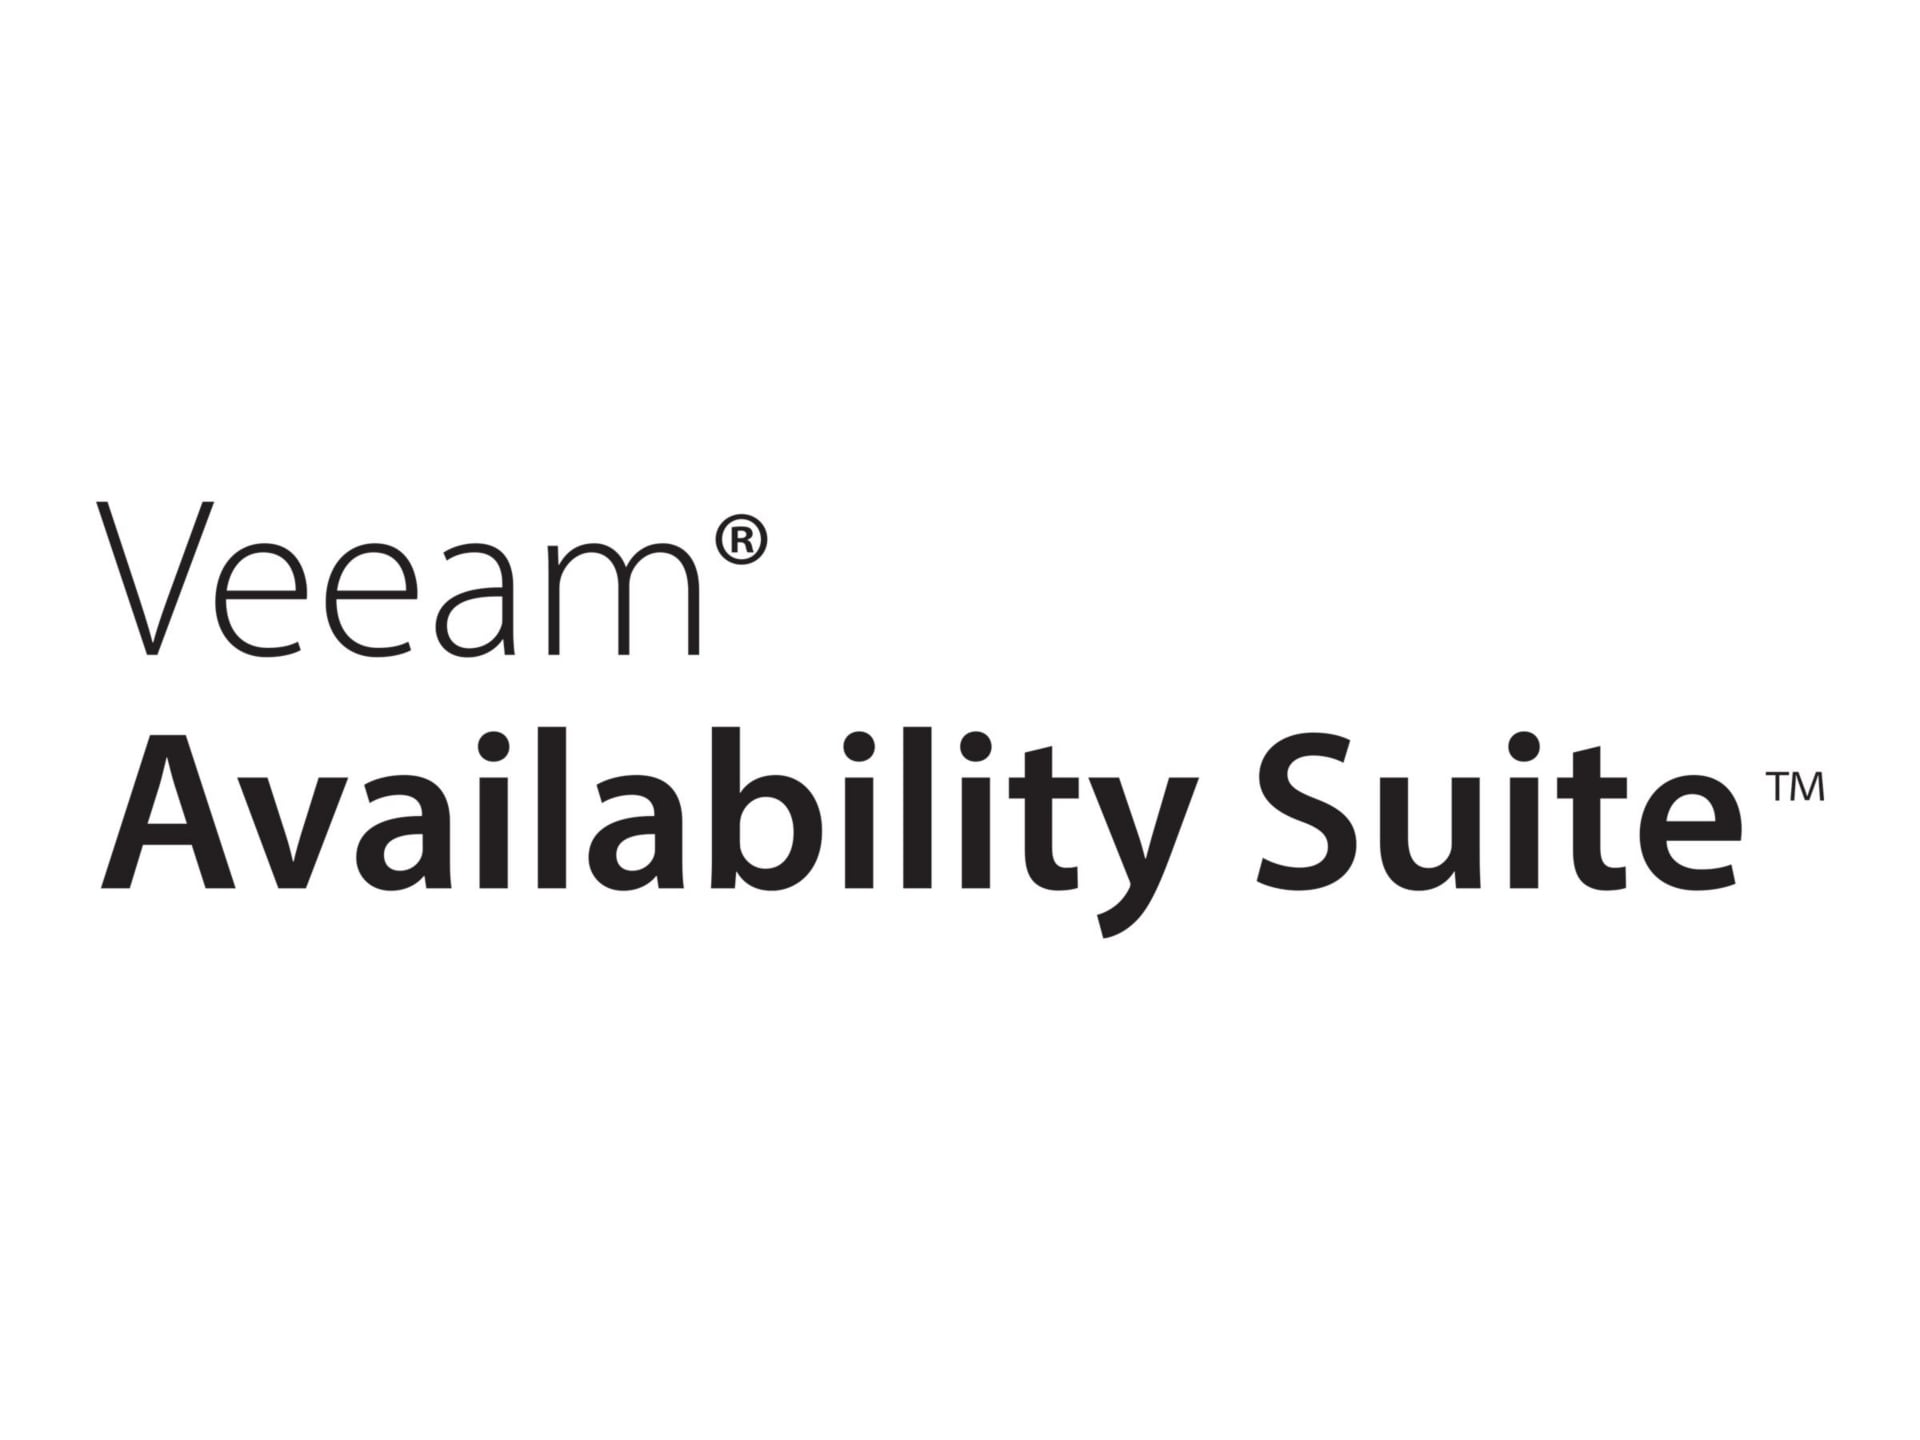 Veeam Availability Suite Universal License - Annual Billing License (2nd ye